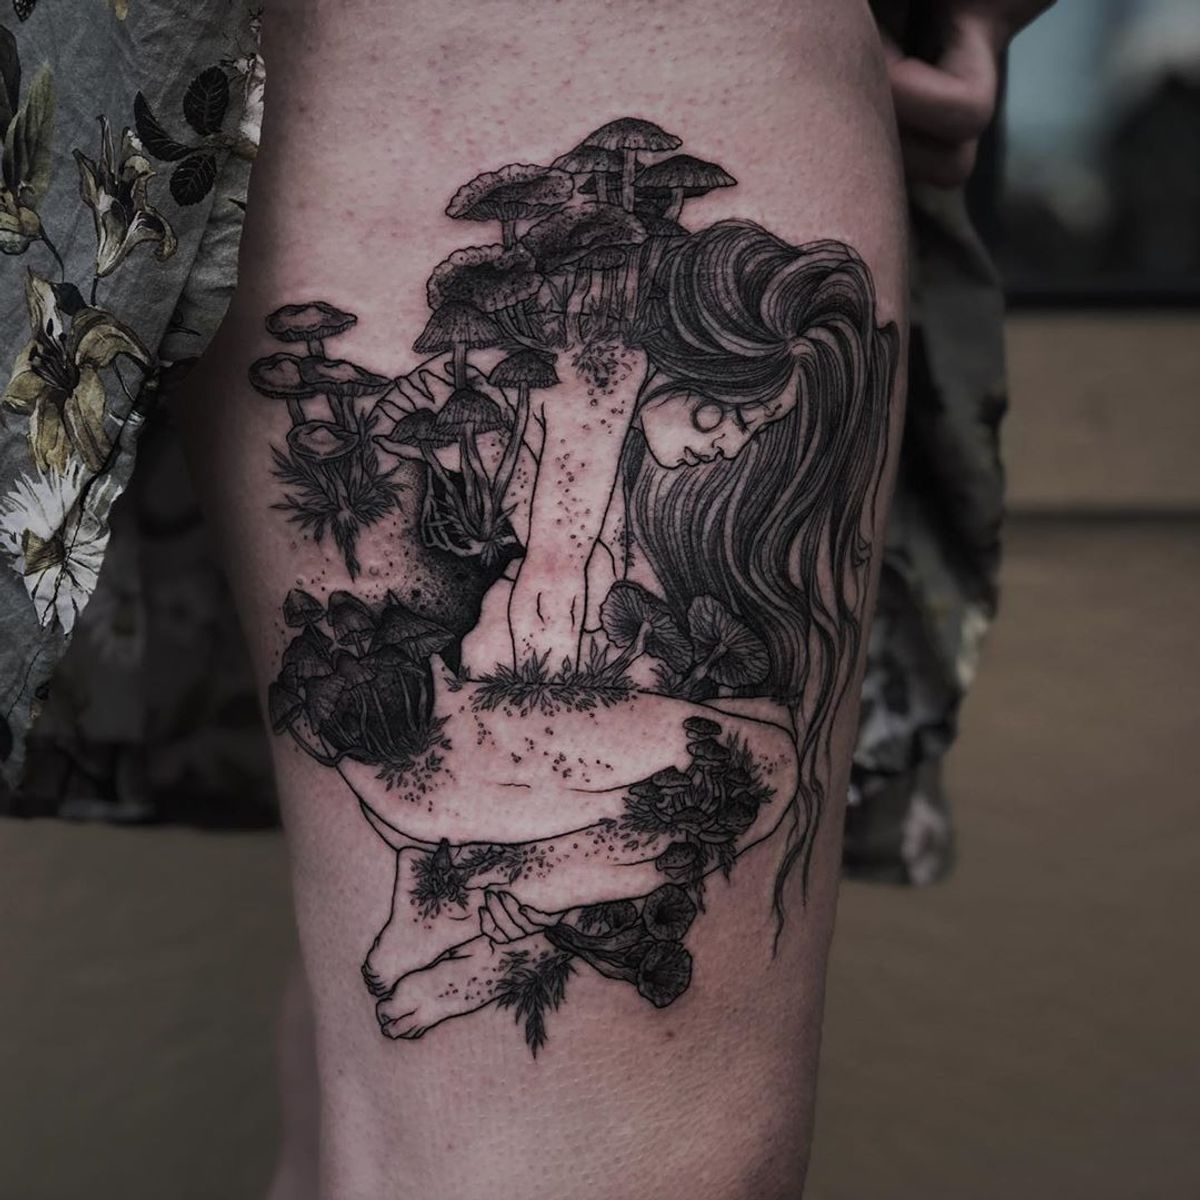 Tattoo uploaded by Jennifer R Donnelly • Illustrative tattoo by Ruby ...